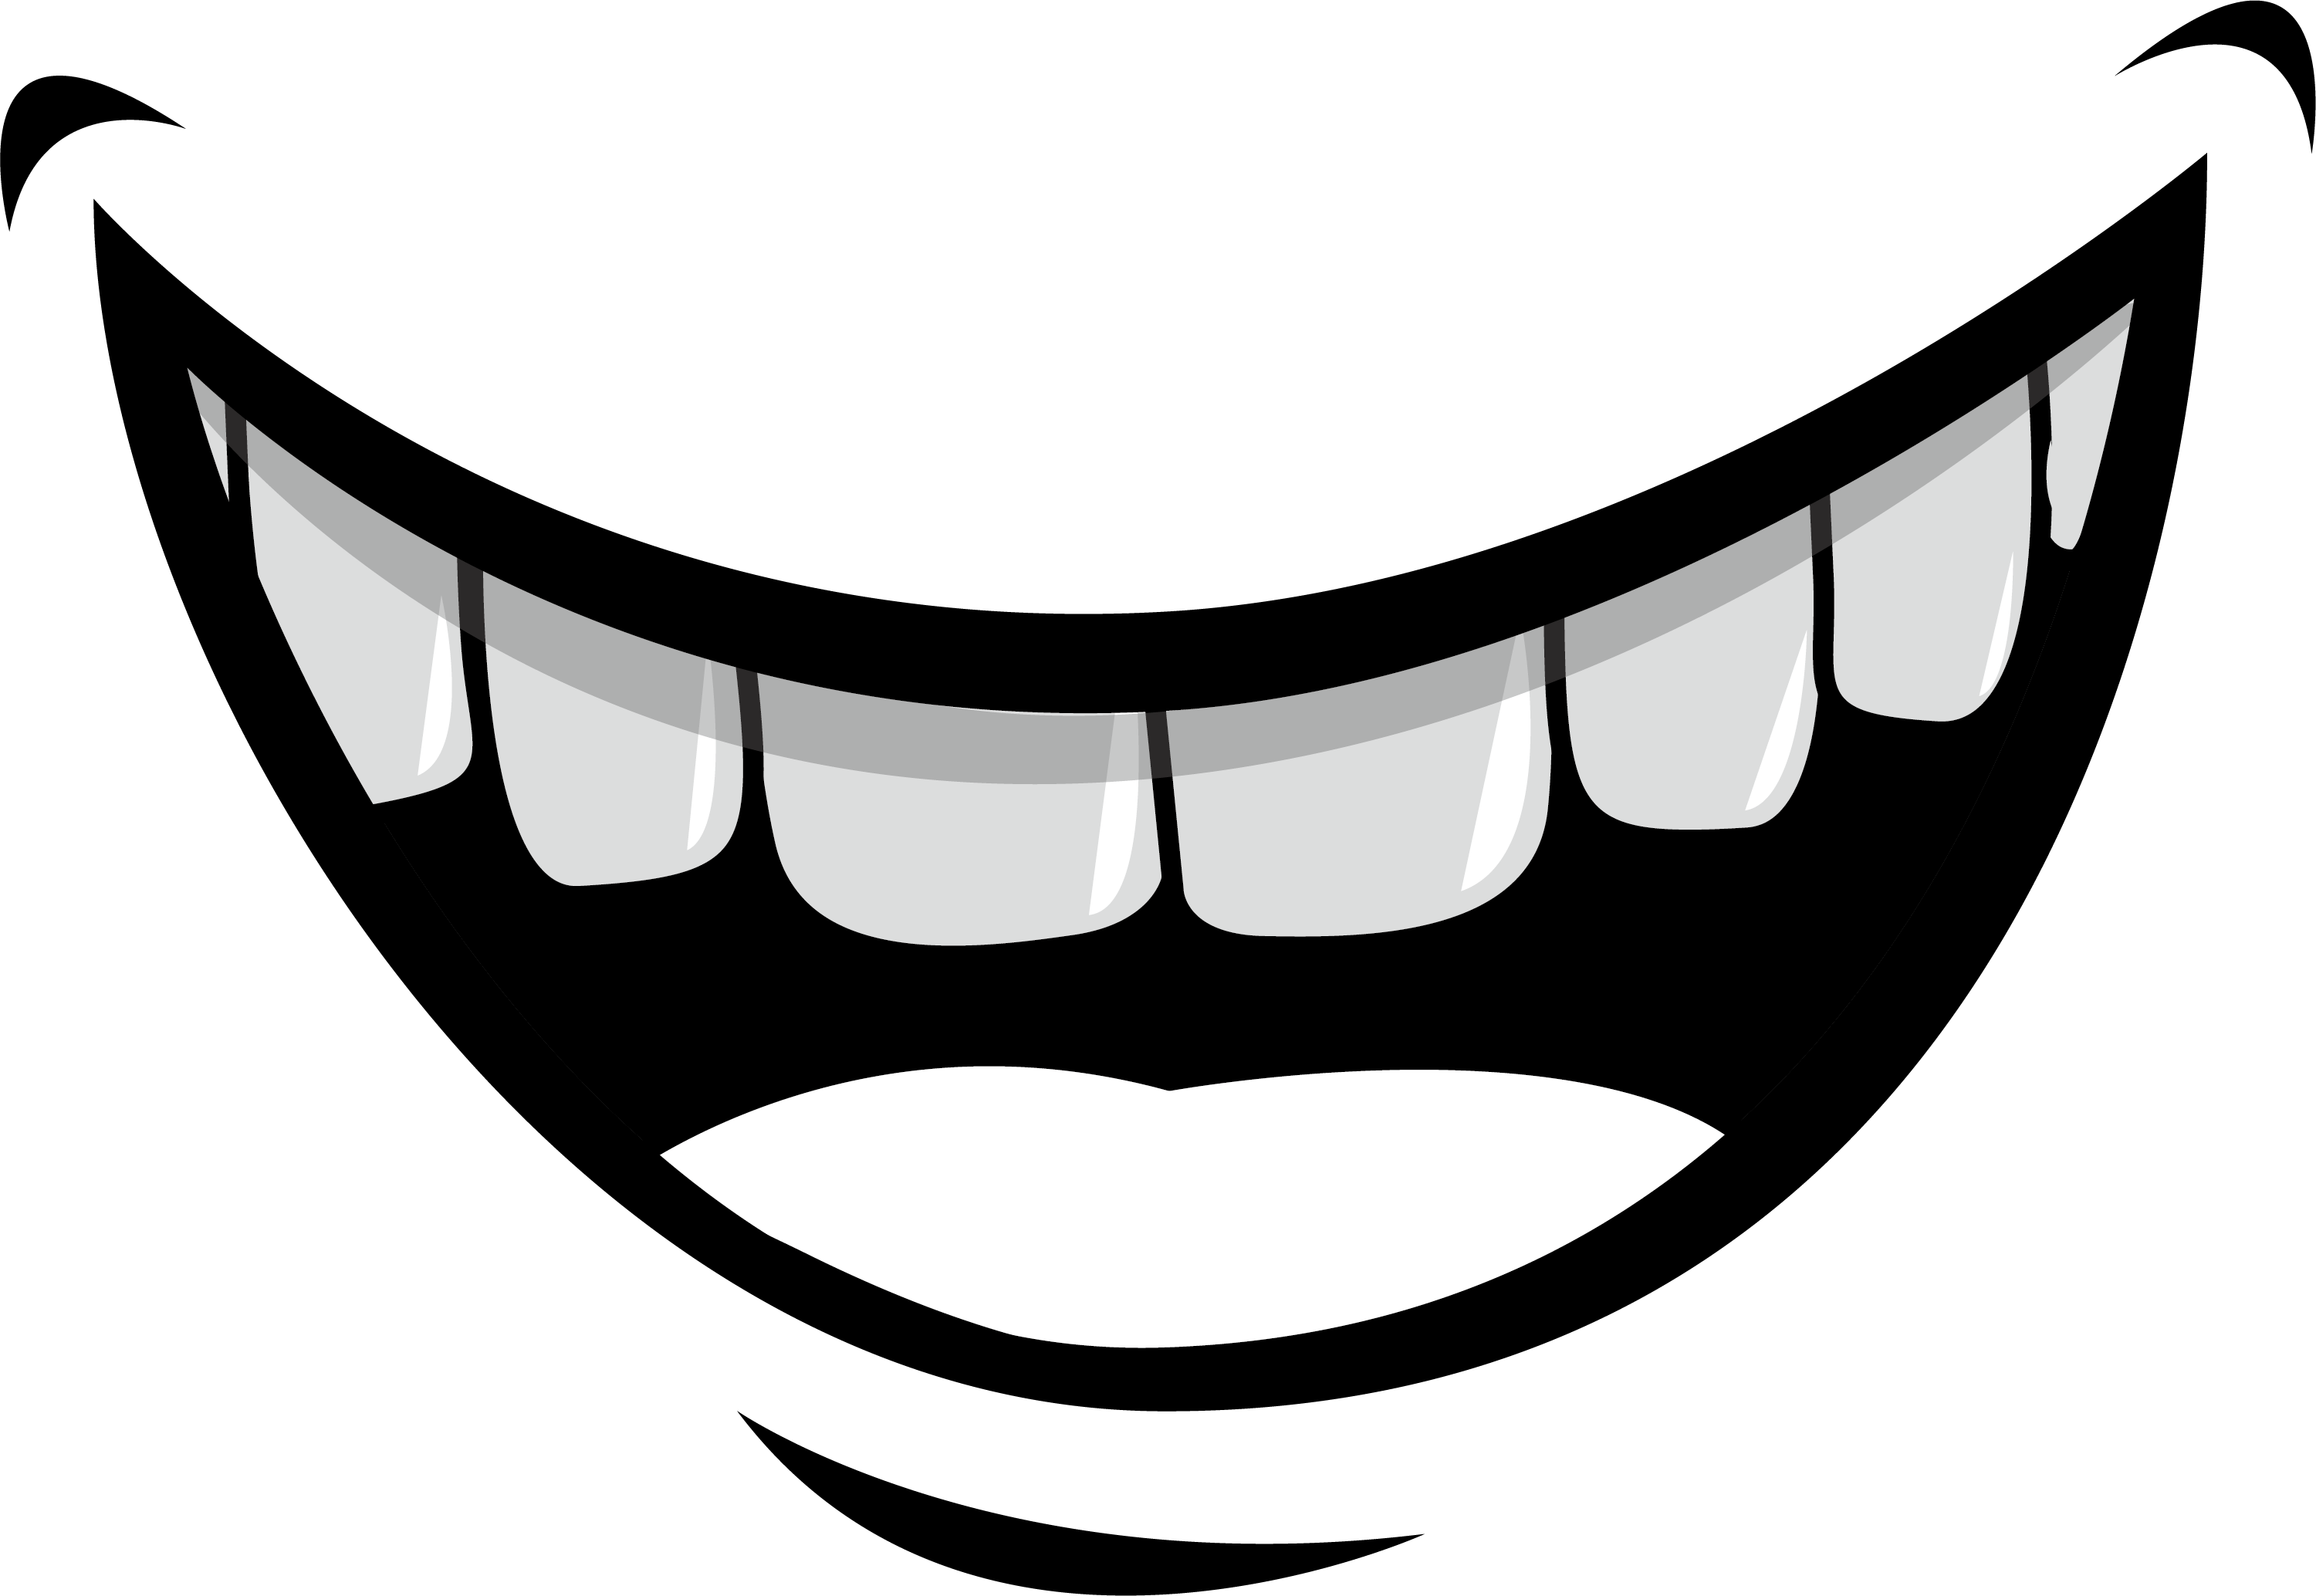 84100 Smile Mouth Illustrations RoyaltyFree Vector Graphics  Clip Art   iStock  Man smile mouth Smile mouth vector Big smile mouth